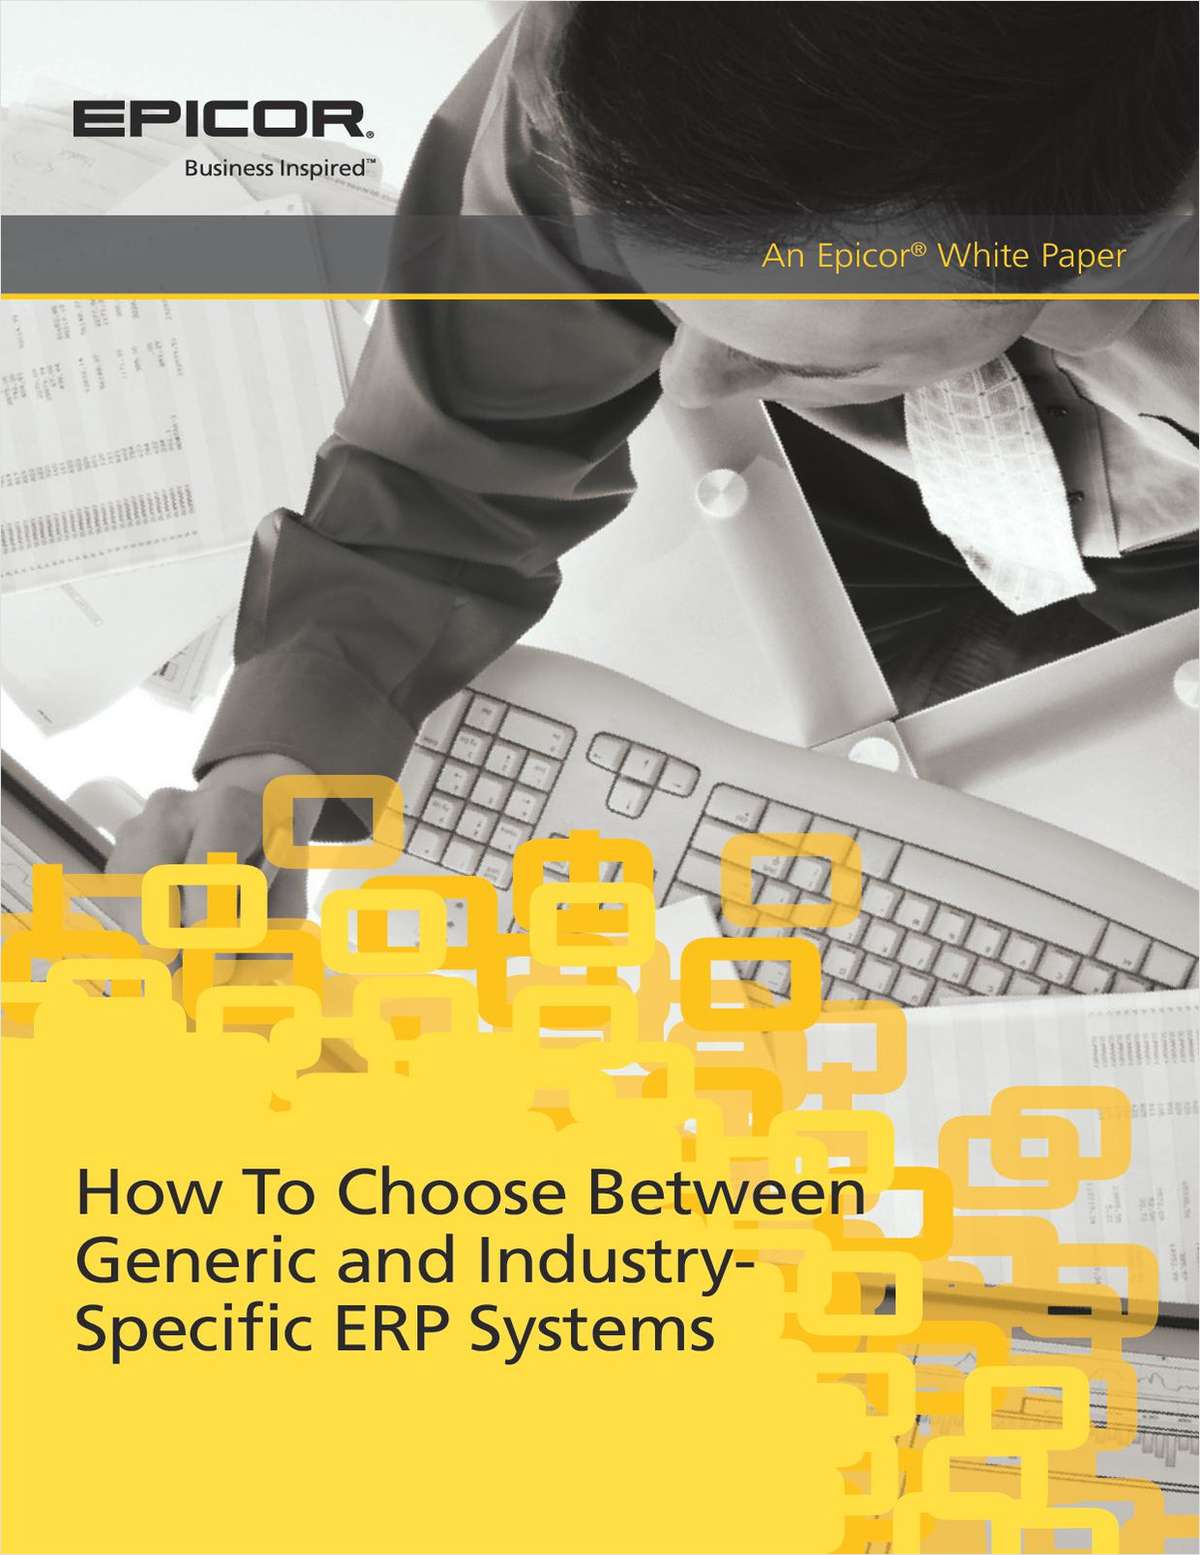 w aaaa6317c8 - How To Choose Between Generic and Industry-Specific ERP Systems